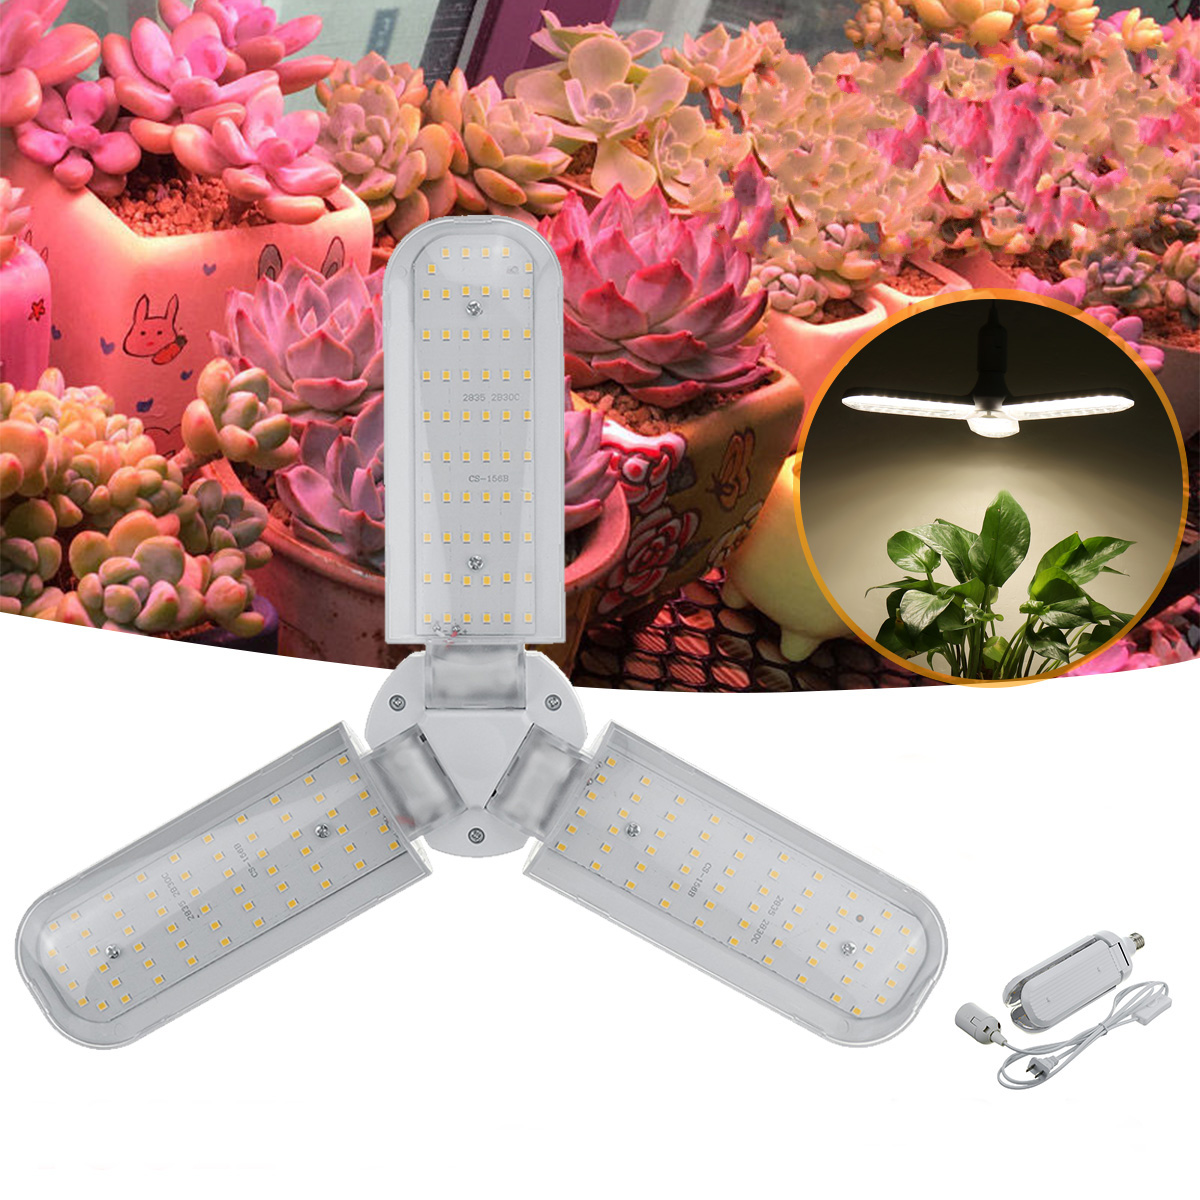 

AC110-265V E27 40W 2835 Three-Leaf LED Grow Light Full Spectrum Hydroponic Lamp with Hanging Holder for Plant